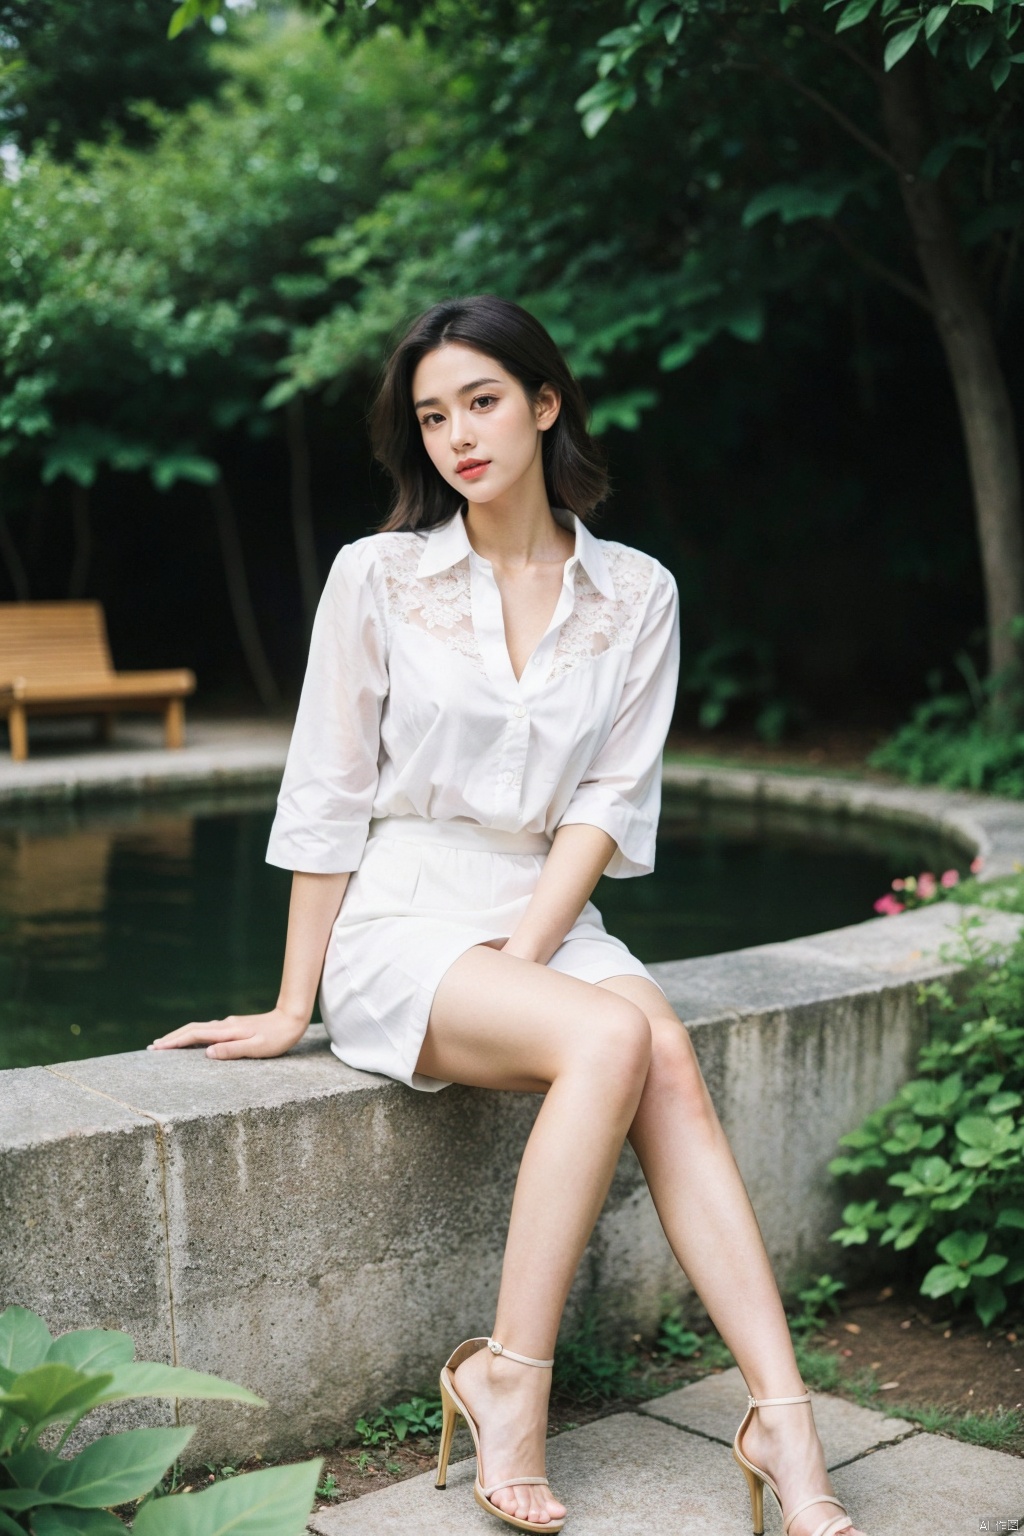  (8k,RAW photo,best quality,masterpiece:1.2),(realistic,photo-realistic),((poakl))Panoramic seated full body shot of an attractive professional lady posing on the edge of a stone bench in an idyllic outdoor garden setting, wearing a fitted white blouse with the top few buttons unbuttoned to reveal a hint of lace lingerie and flowing A charcoal gray midi dress clings to her curves, black strappy heels accentuate her legs, her hair is styled elegantly in the breeze, and her perfectly made-up face is adorned with statement sunglasses, a tranquil pond surrounded by lush greenery and colorful flowers, capturing the perfect blend of professional sophistication and sensual femininity in the tranquility of nature